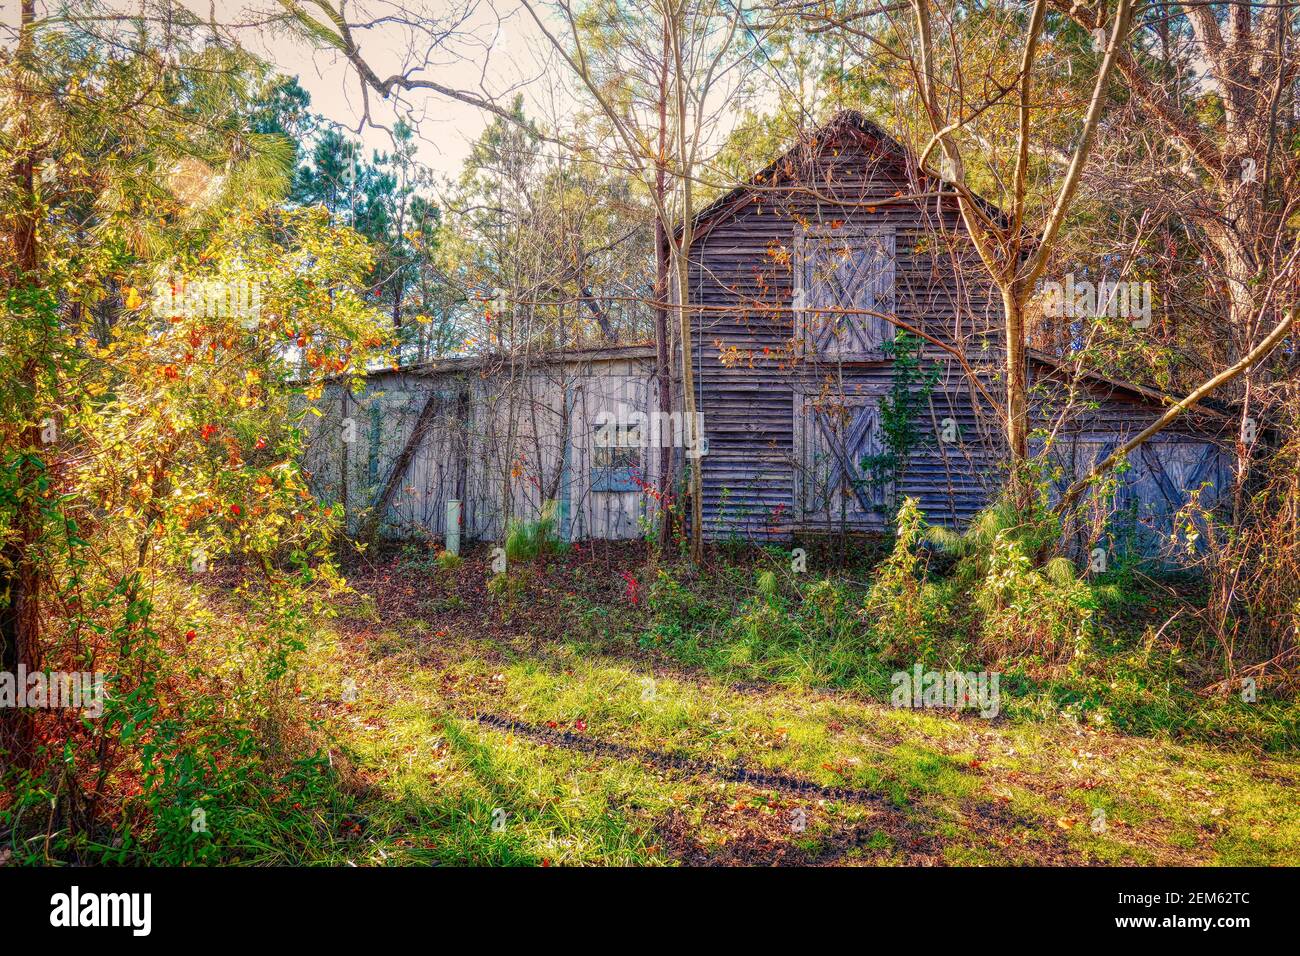 A sunny old wooden barn landscape with trees out in the country. Stock Photo